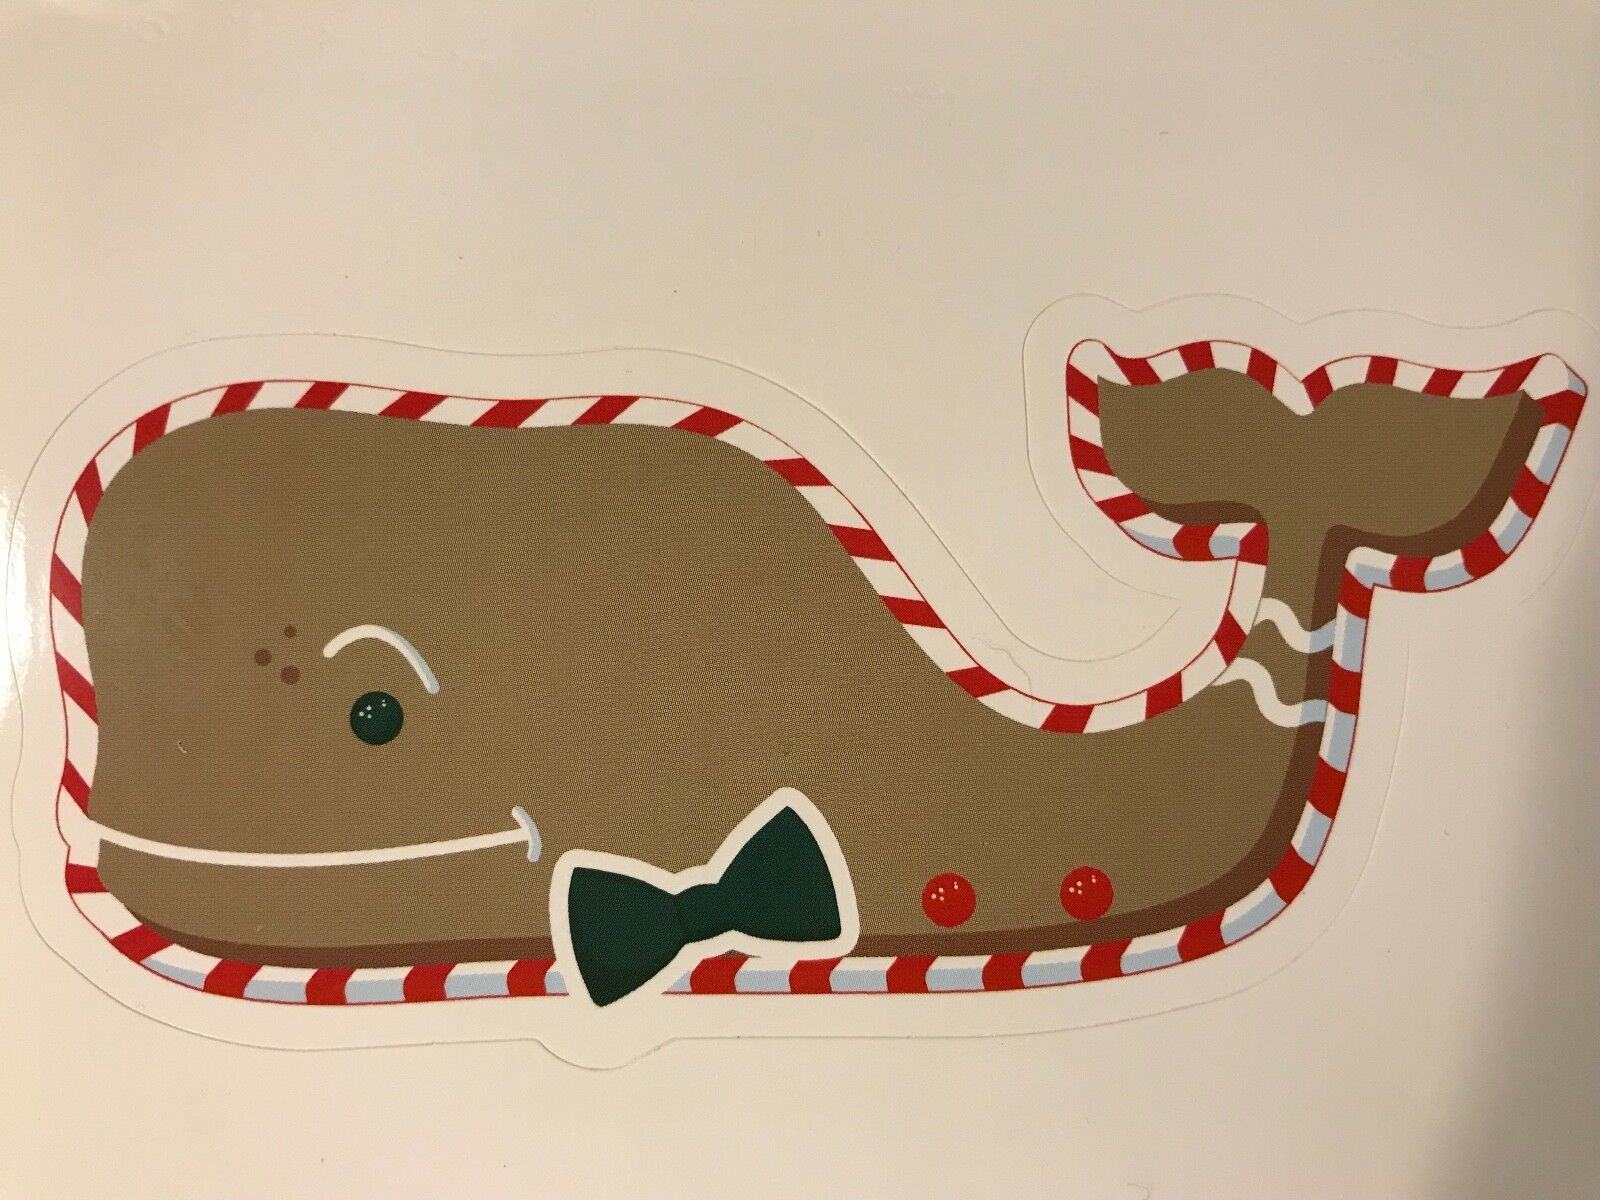 NEW Vineyard Vines Gingerbread with Bowtie Whale Sticker Decal